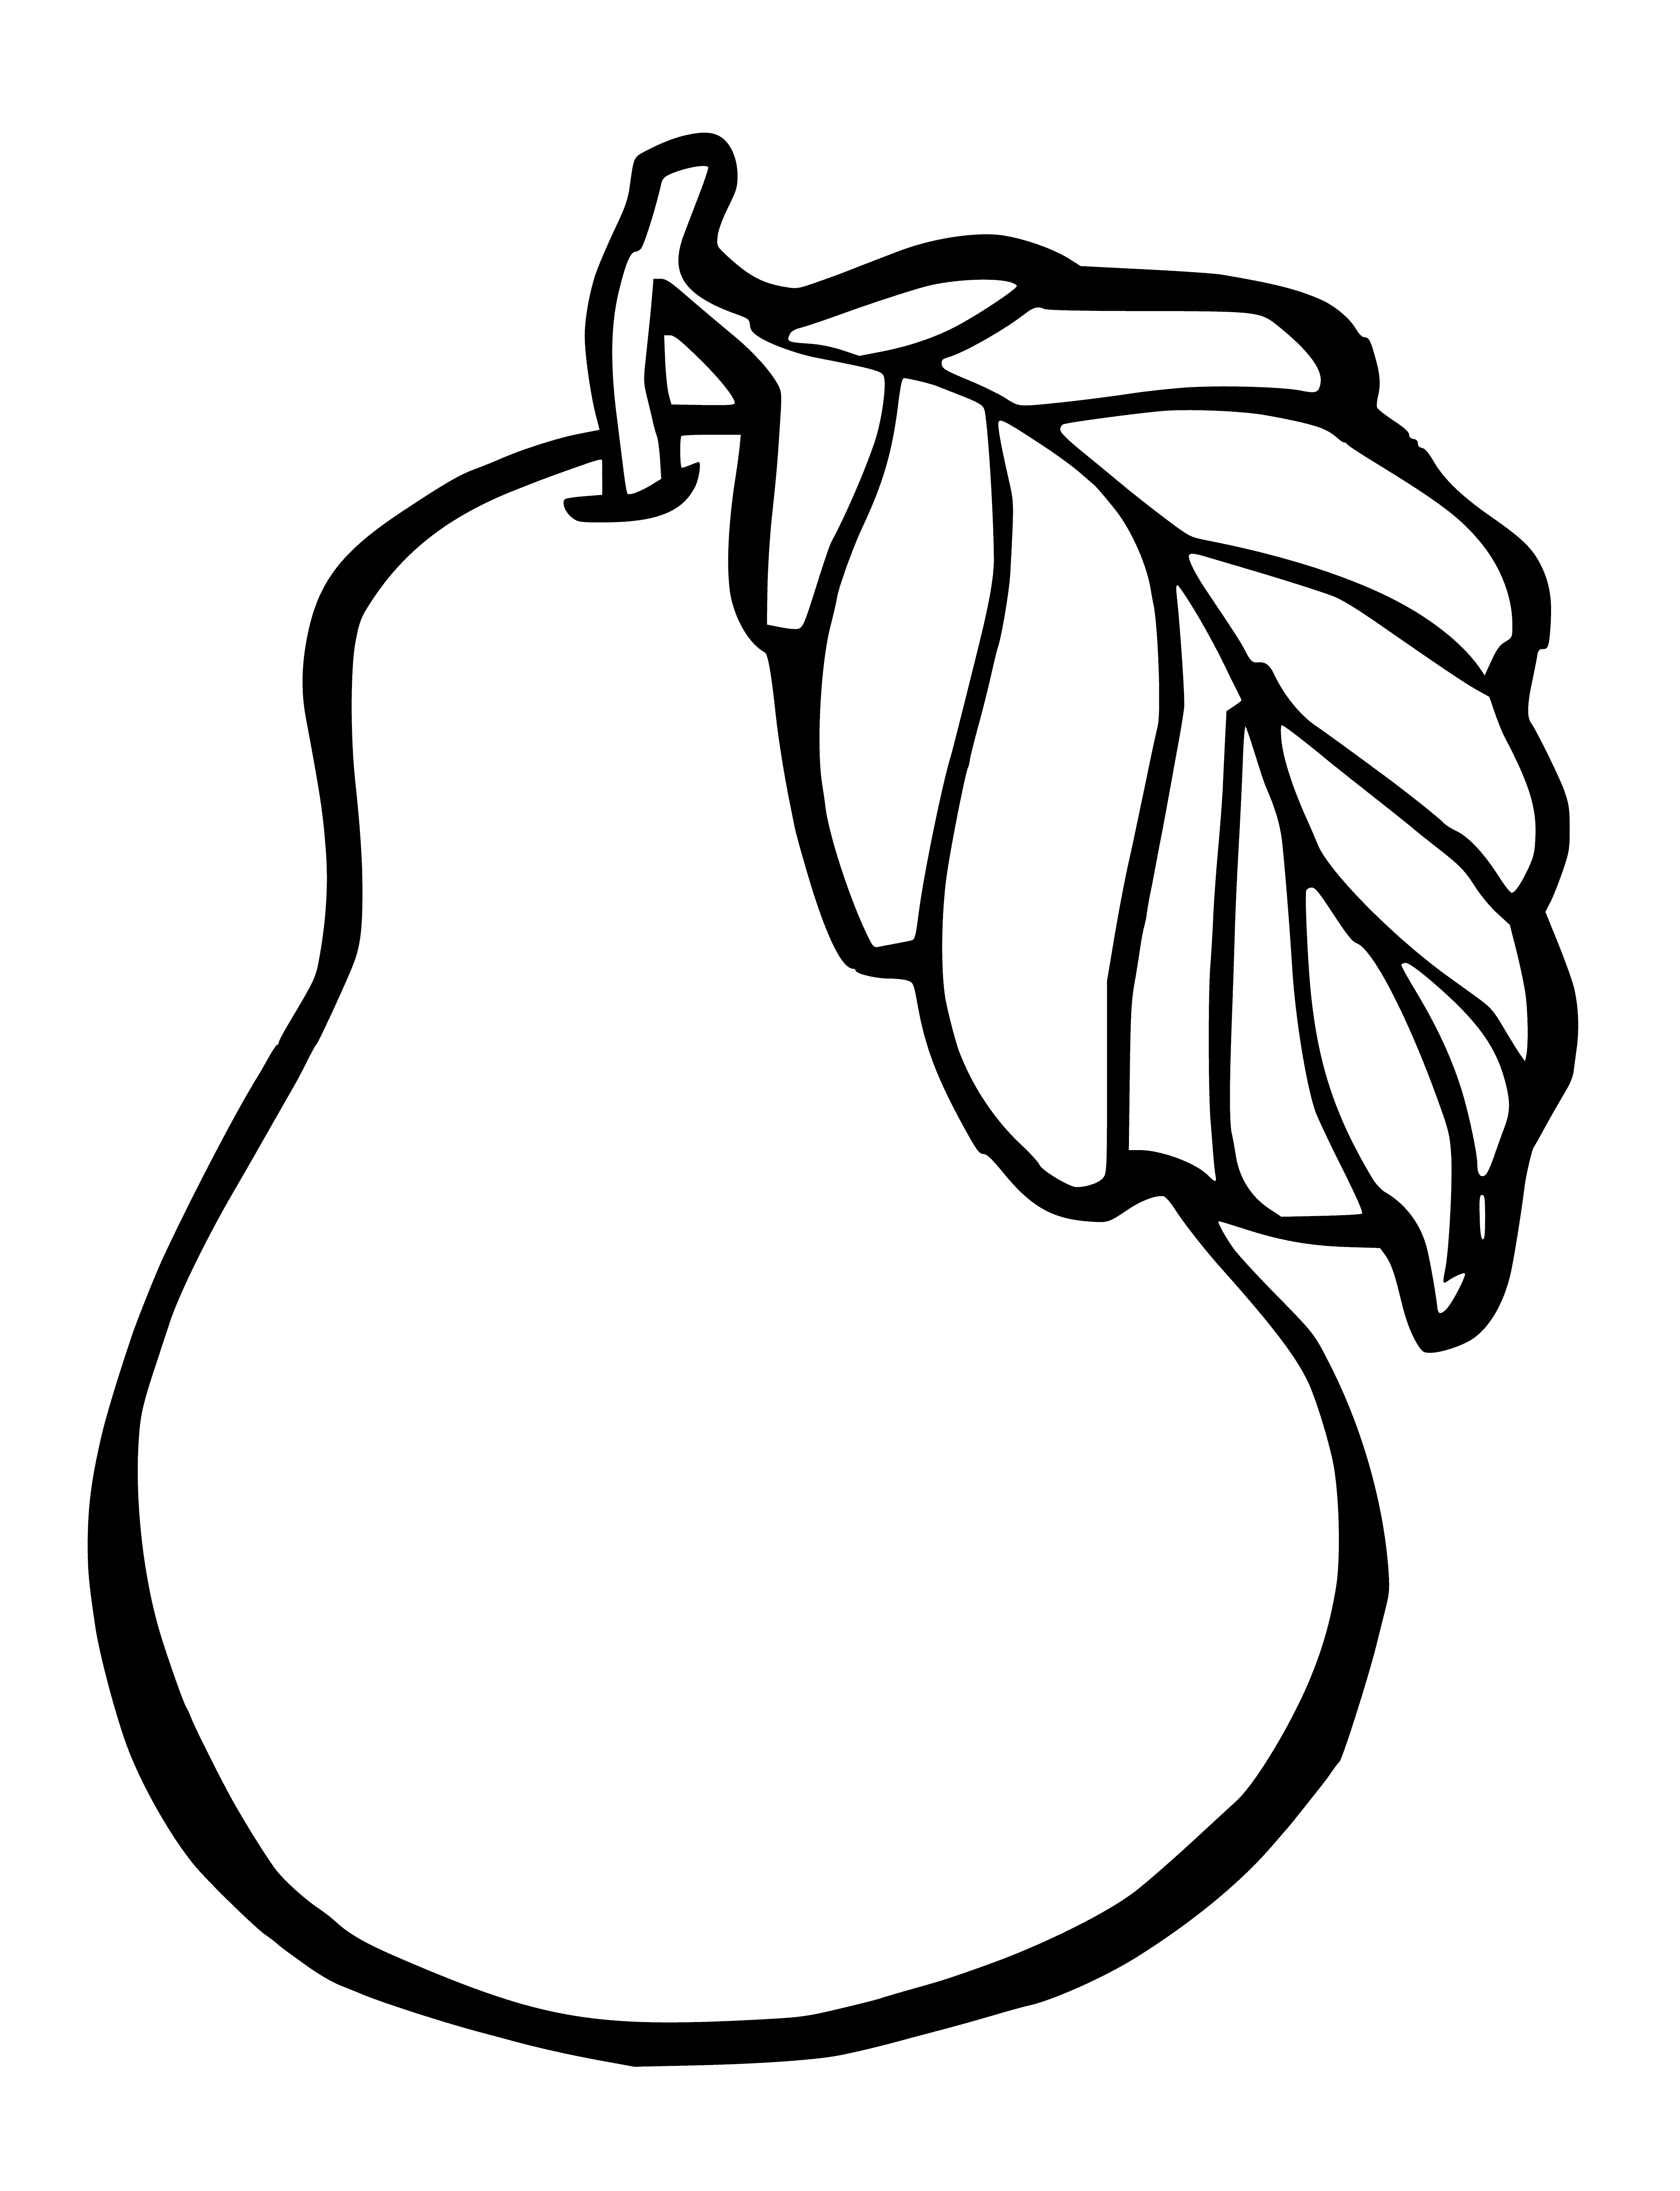 coloring page: Close up of a yellow pear w/ green stem, brown spots, long thin stem, bent top, & leaves.#coloring pages #fruits #food